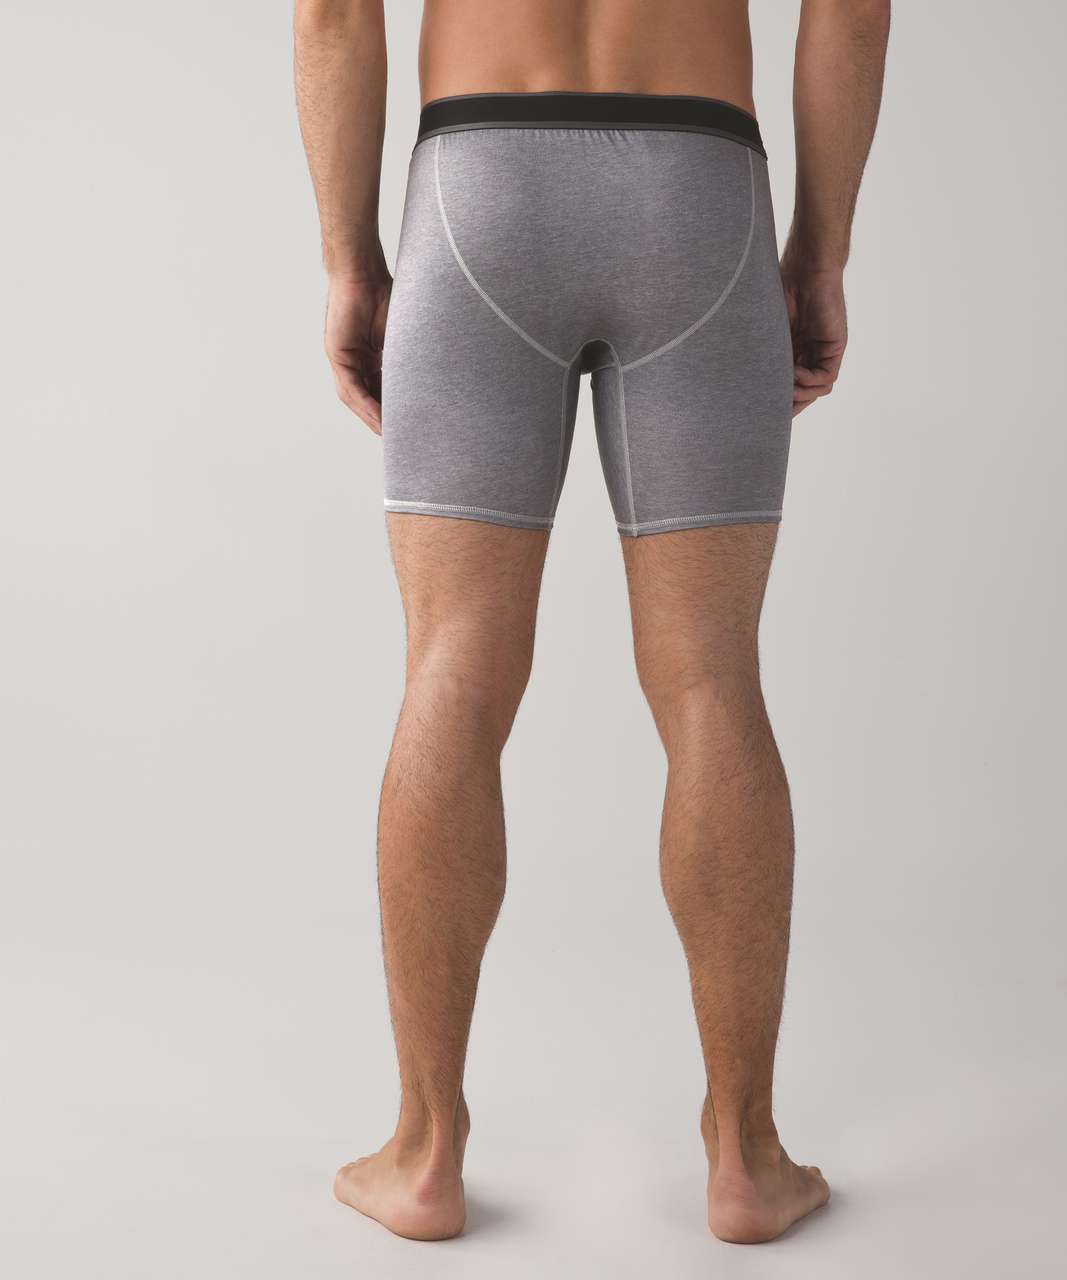 Lululemon No Boxer Boxer (The Long One) - Heathered Texture Printed Ambient Grey